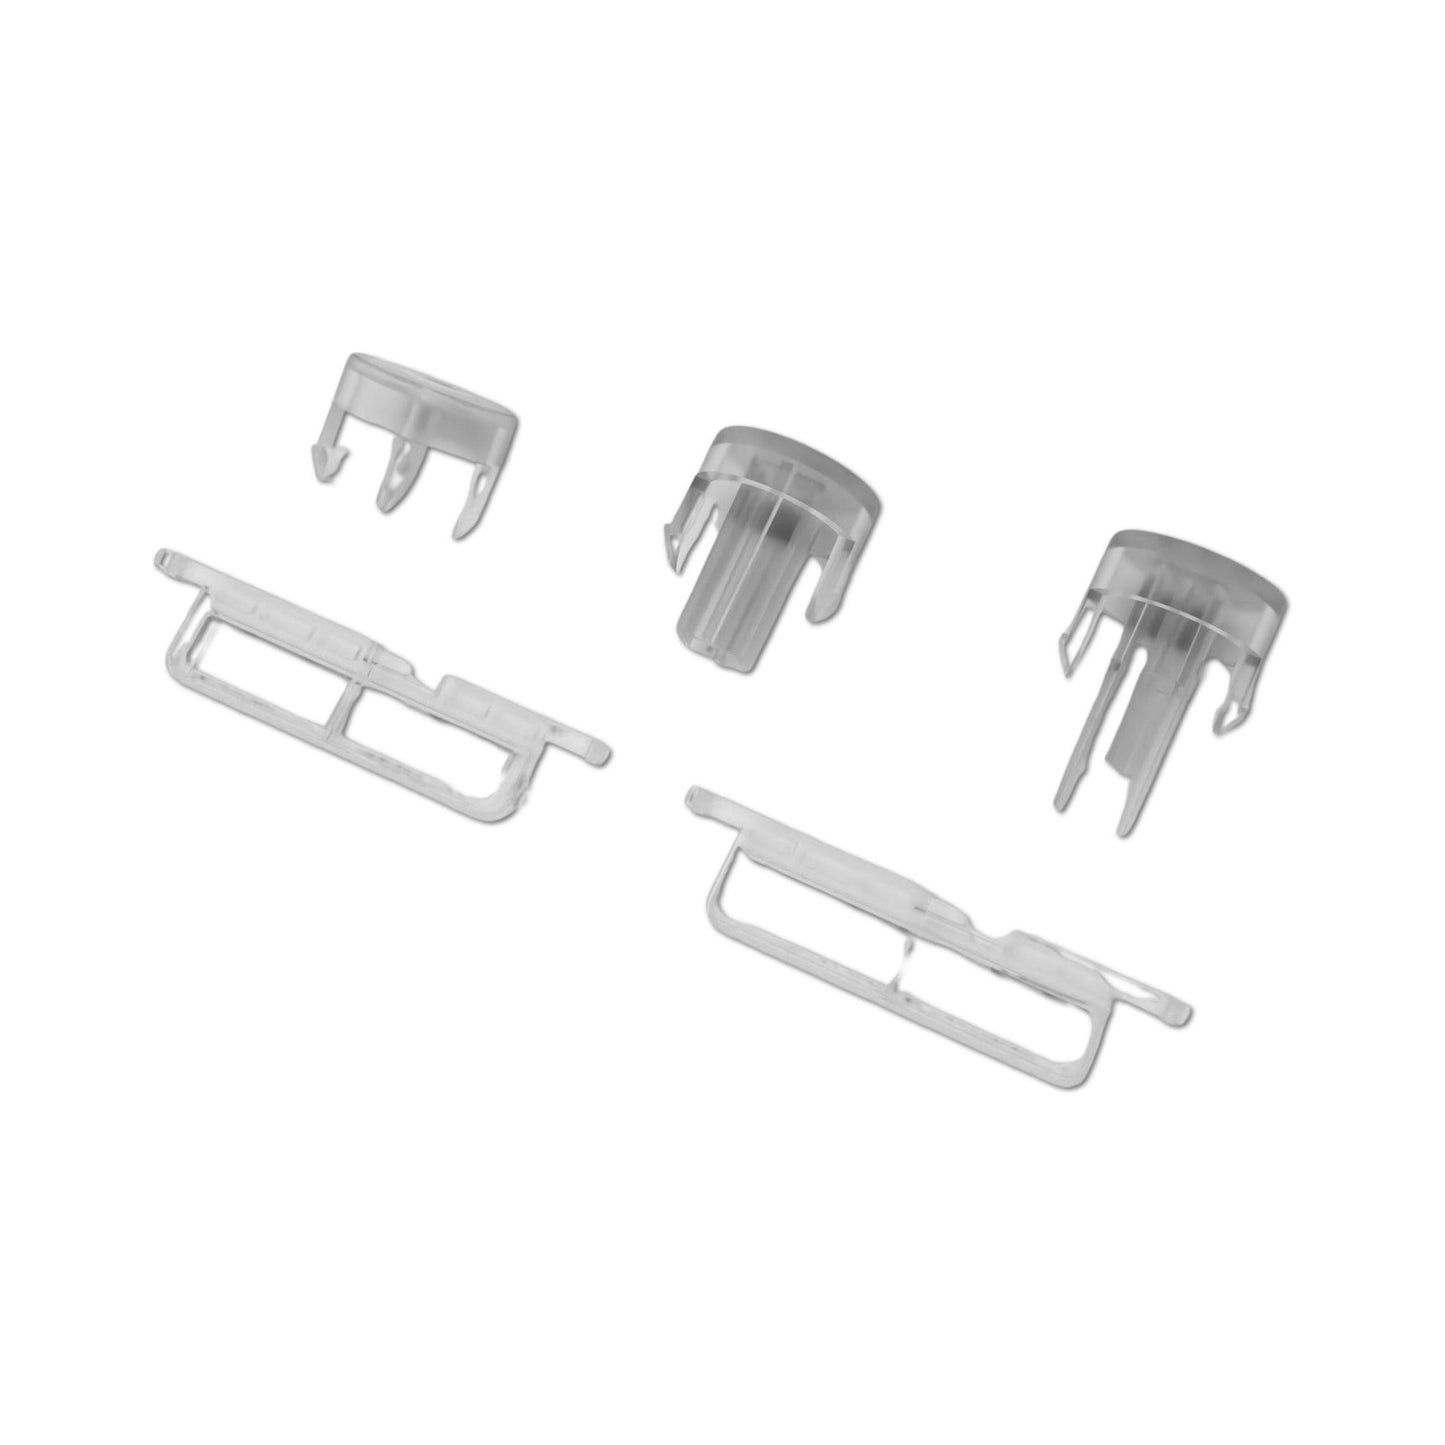 Gamecube Housing Accessories - Replacement Buttons